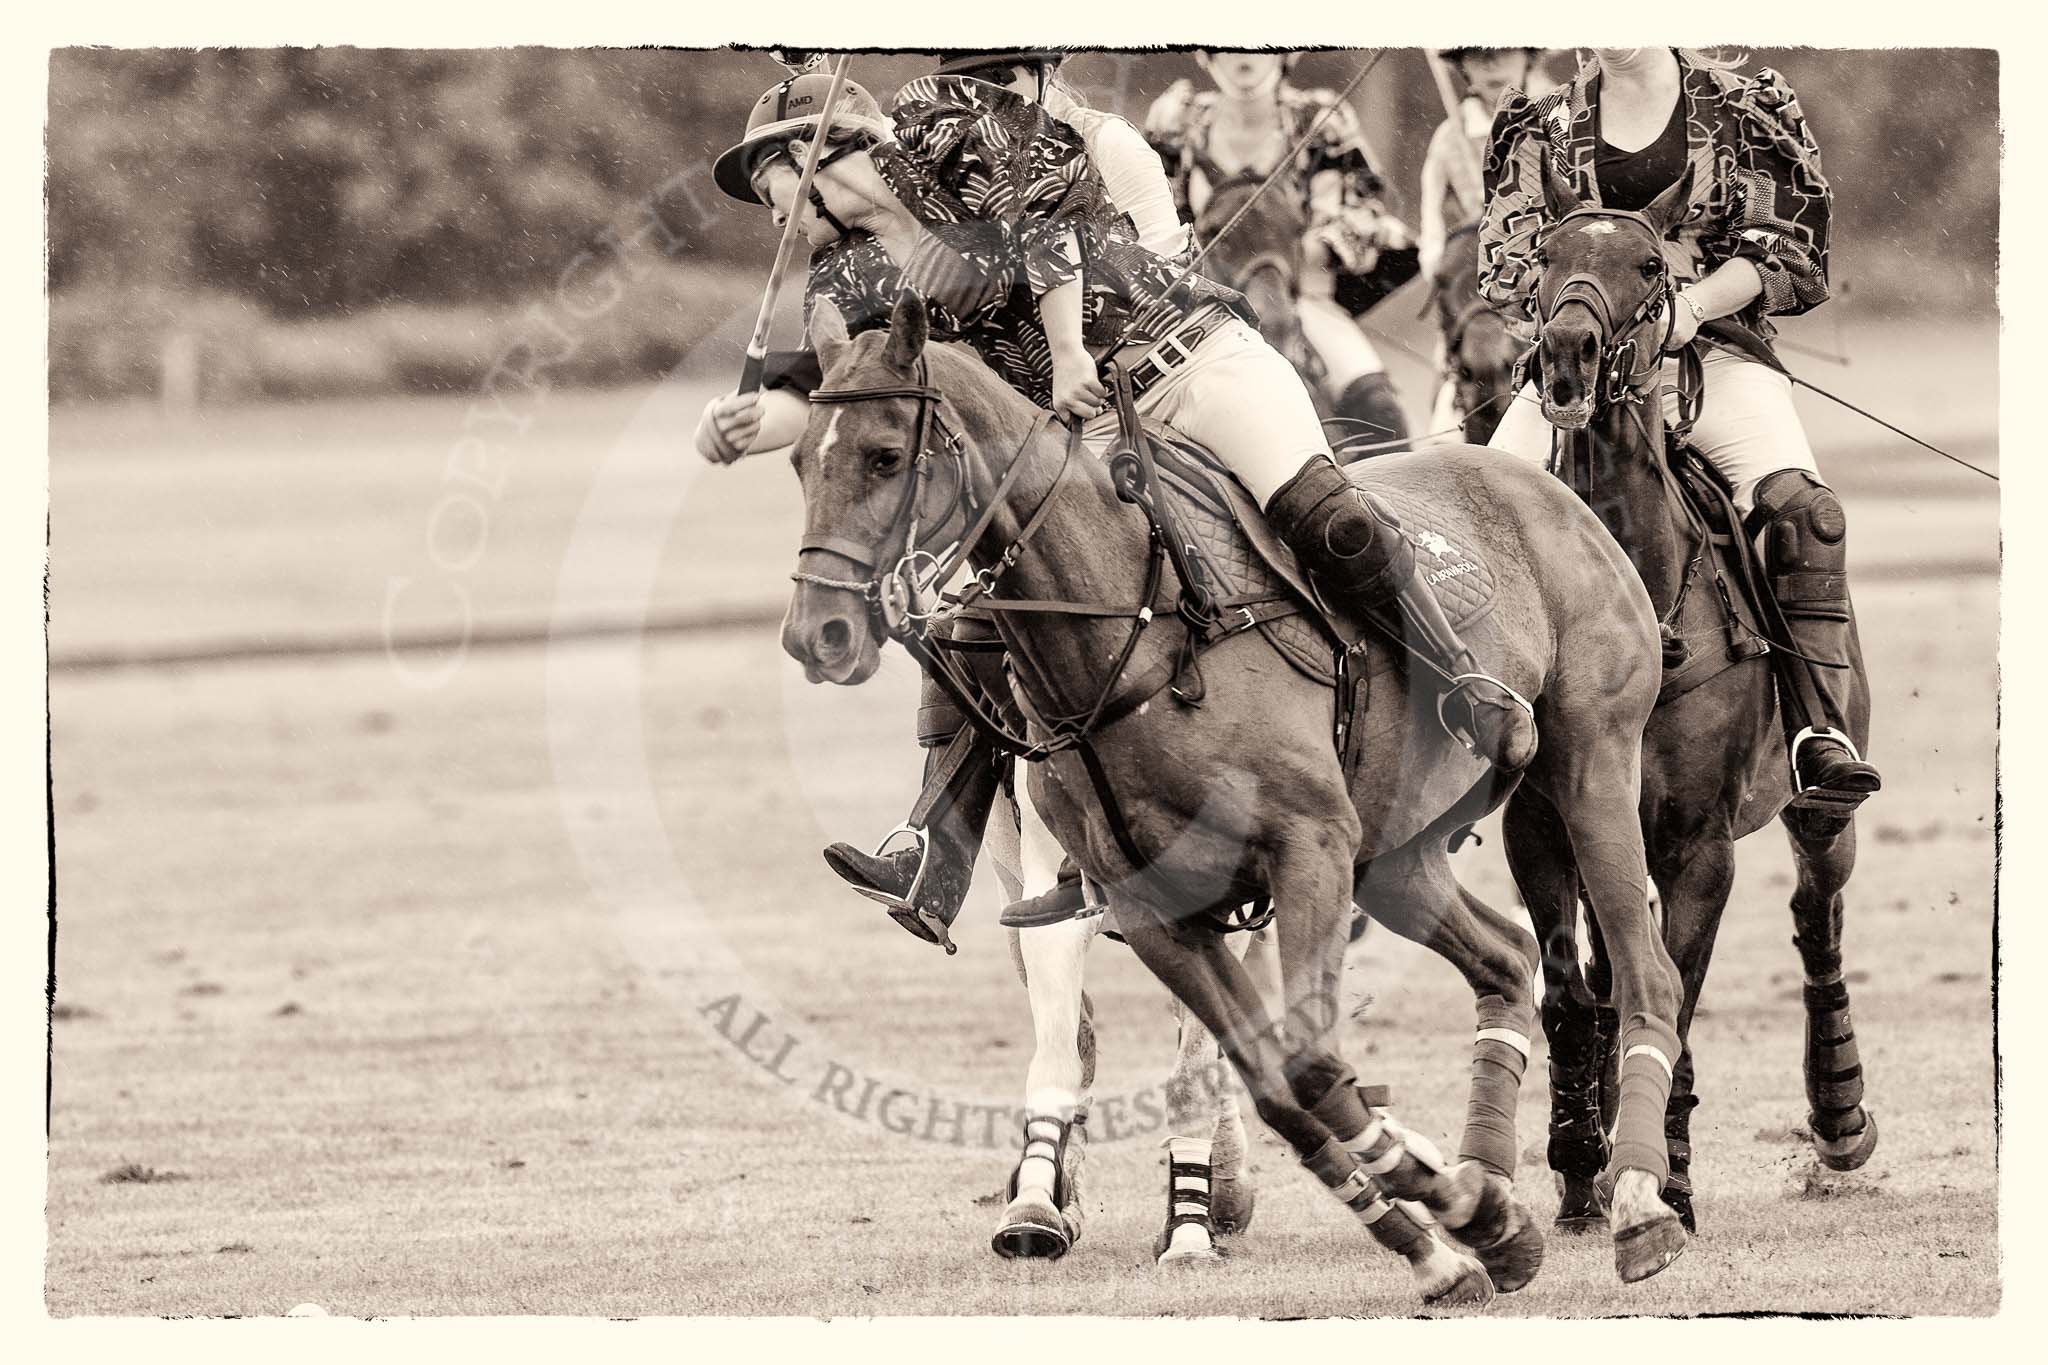 7th Heritage Polo Cup semi-finals: AMG PETROENERGY Polo Player Annabel McNaught-Davis changing direction to the game with a backshot open..
Hurtwood Park Polo Club,
Ewhurst Green,
Surrey,
United Kingdom,
on 04 August 2012 at 14:05, image #198